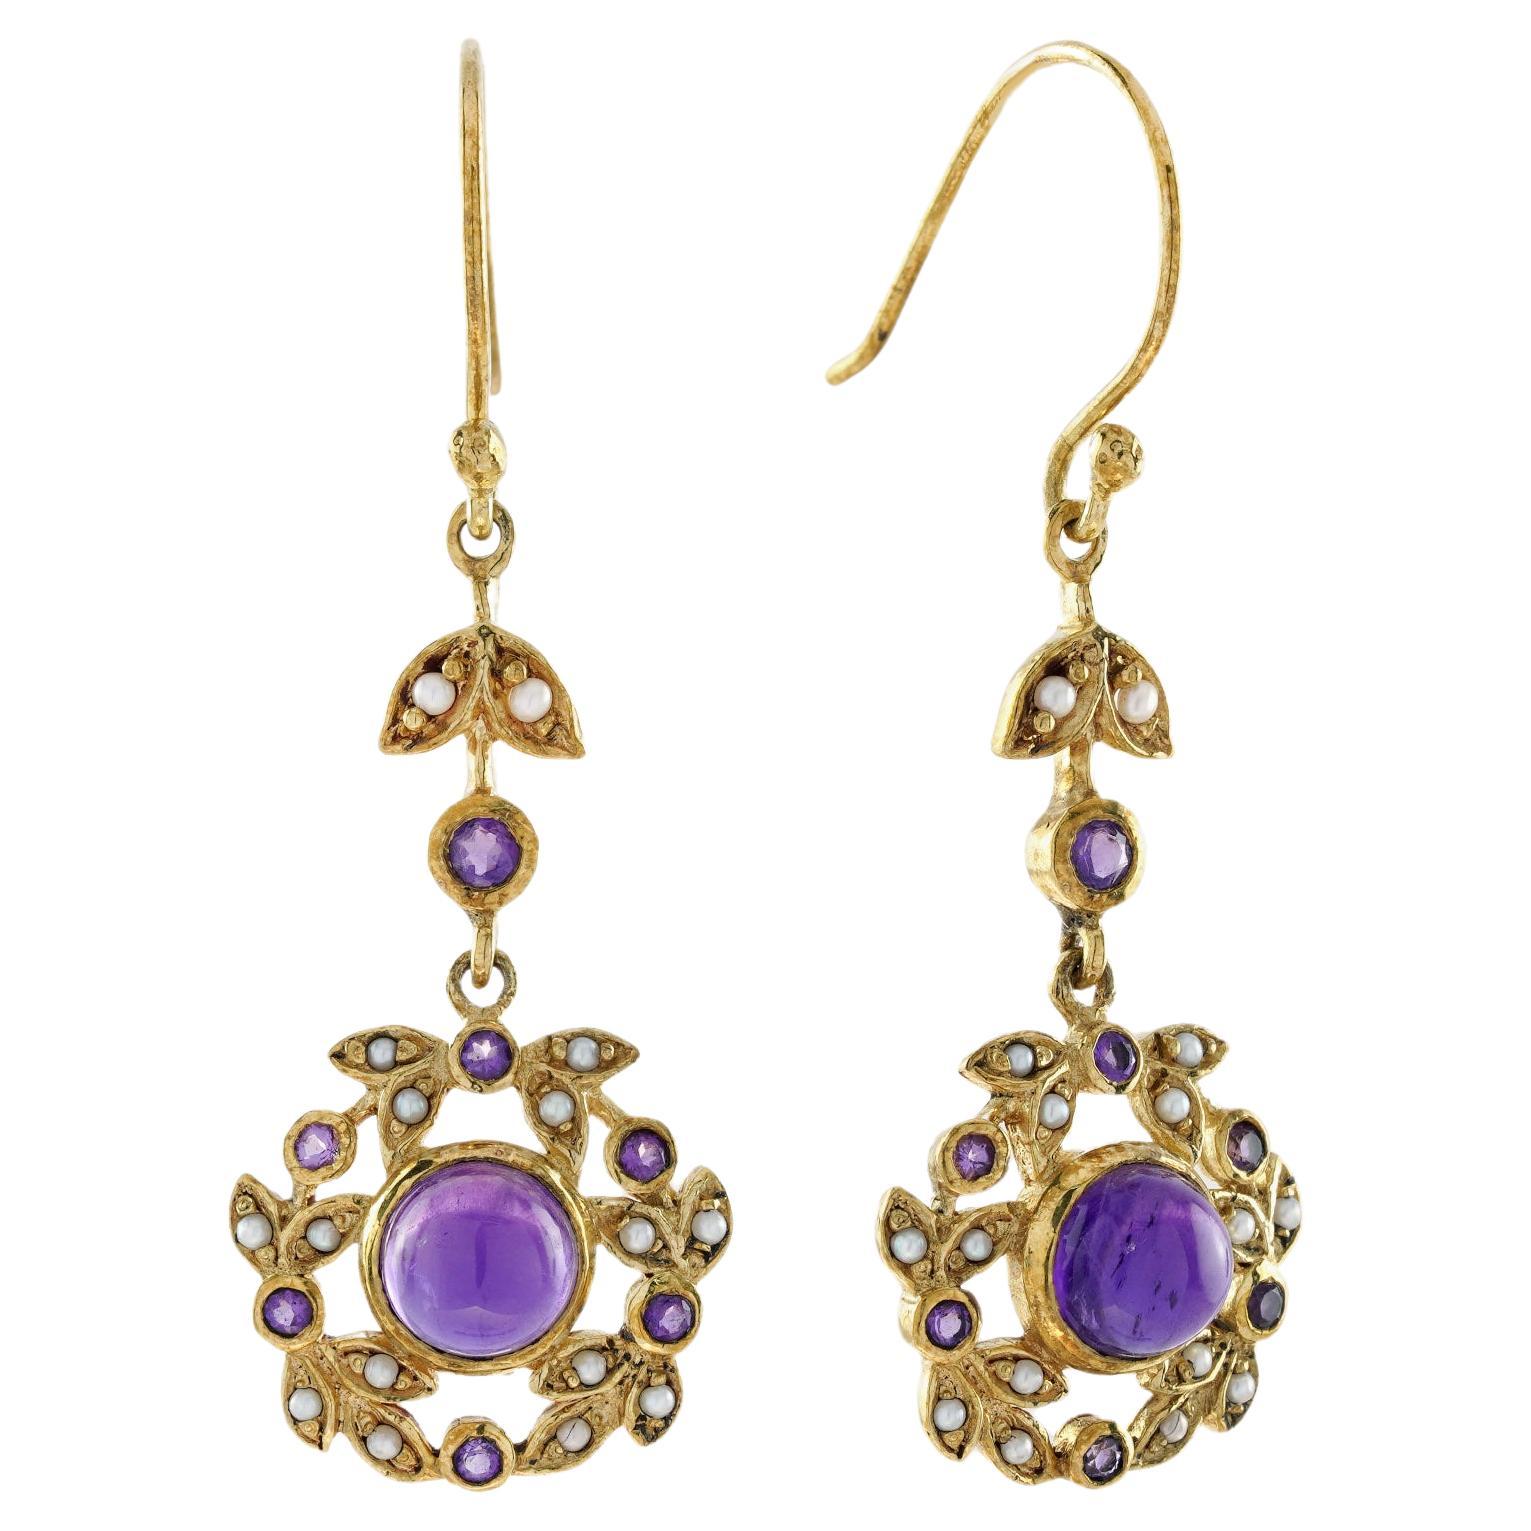 Natural Cabochon Amethyst and Pearl Vintage Style Ivy Drop Earrings in 9K Gold